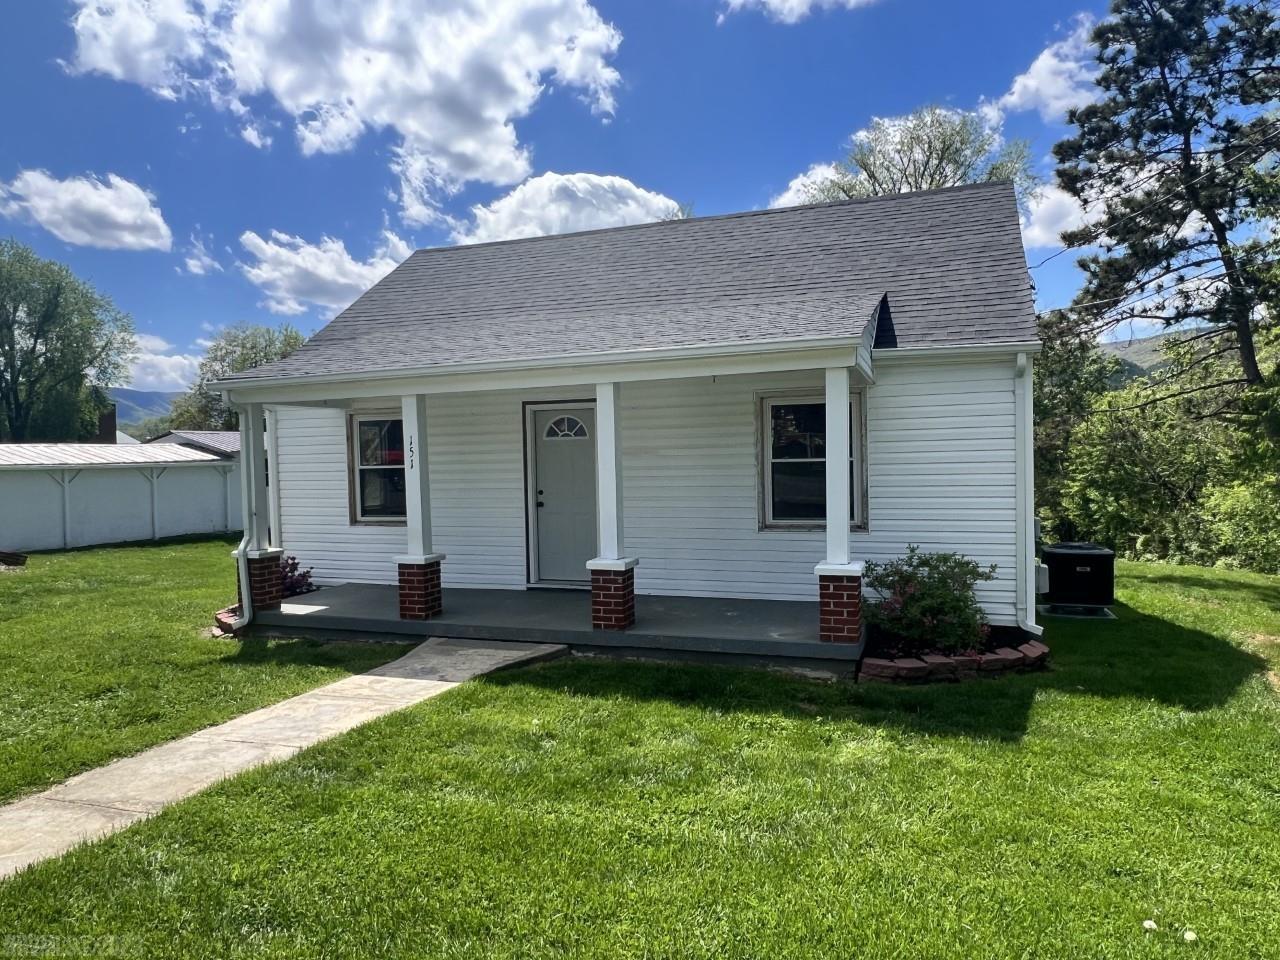 Don't miss out on this newly remodeled 3 bedroom, 1 bath cape that is conveniently located within walking distance of schools, parks and shopping.  All new electric, plumbing, appliances, roof, and heat pump.